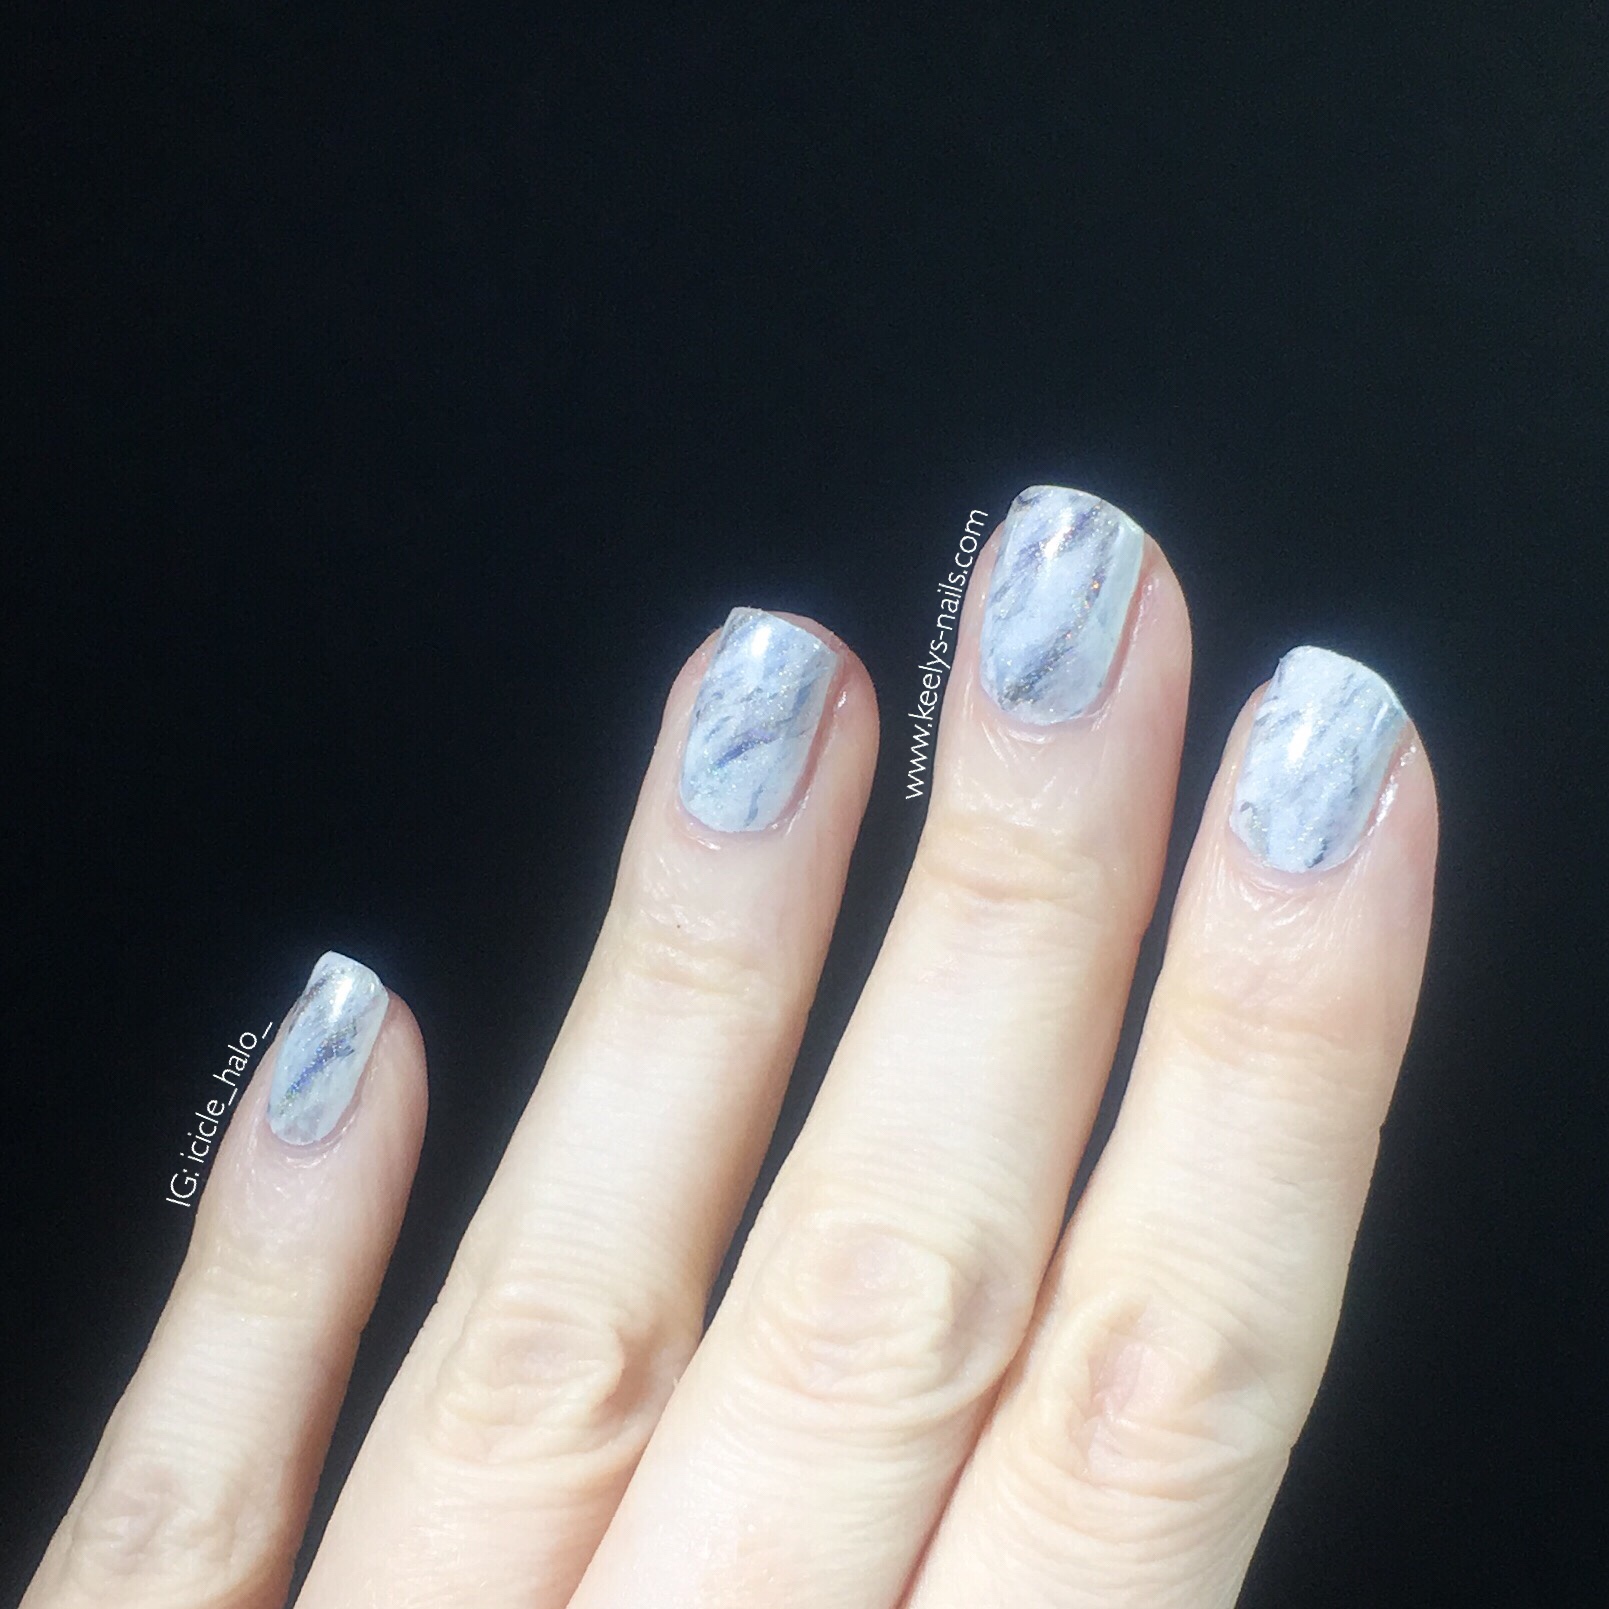 Left hand fingers with white marble nail art design